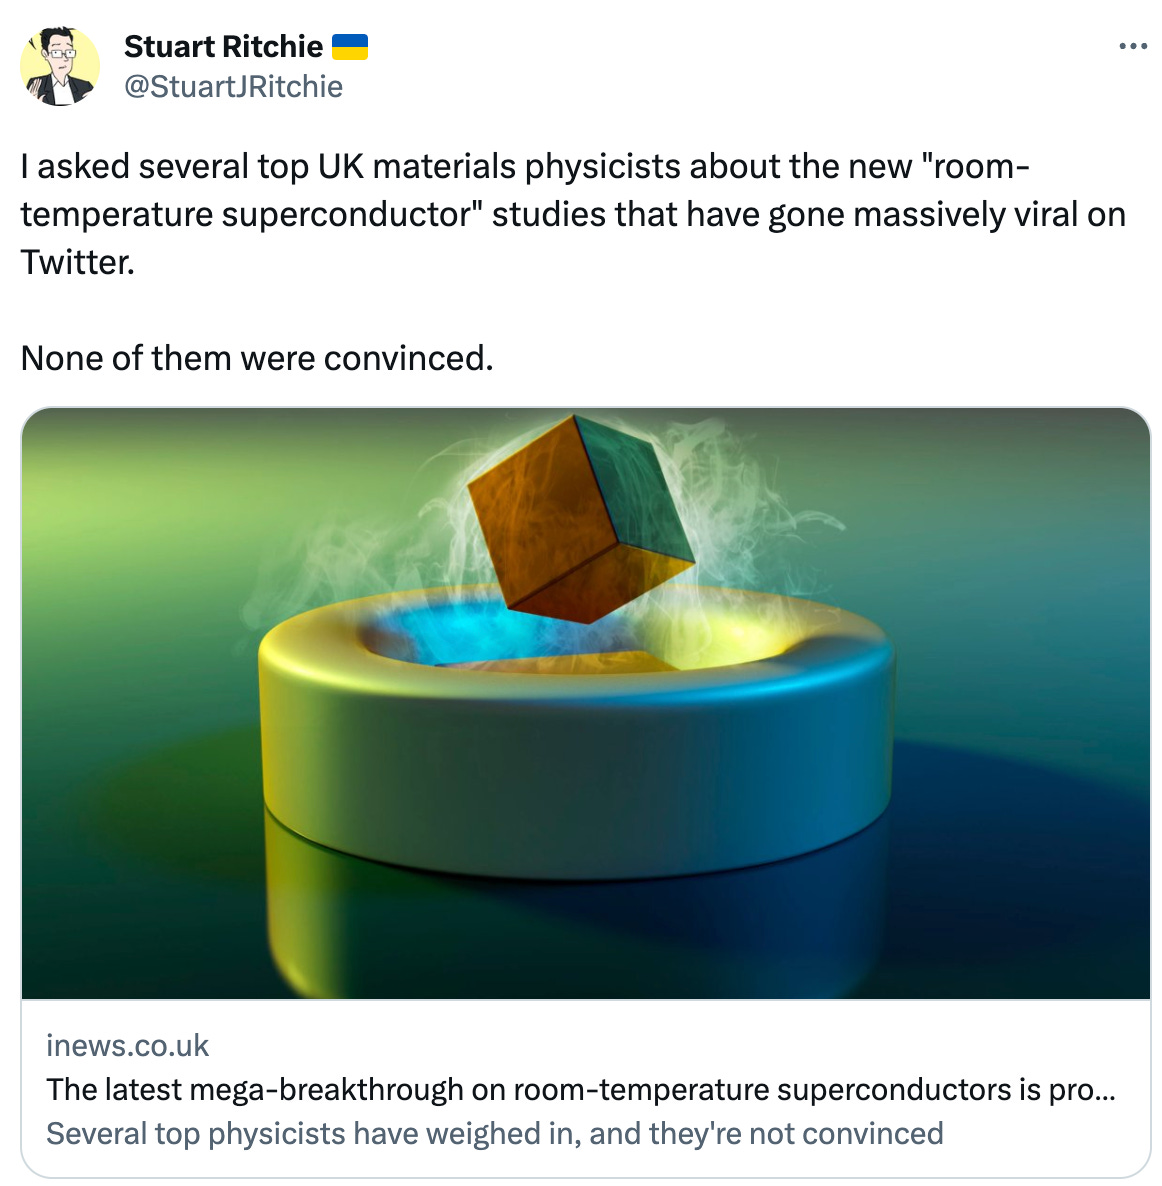  See new Tweets Conversation Stuart Ritchie 🇺🇦 @StuartJRitchie I asked several top UK materials physicists about the new "room-temperature superconductor" studies that have gone massively viral on Twitter.  None of them were convinced. inews.co.uk The latest mega-breakthrough on room-temperature superconductors is probably nonsense Several top physicists have weighed in, and they're not convinced